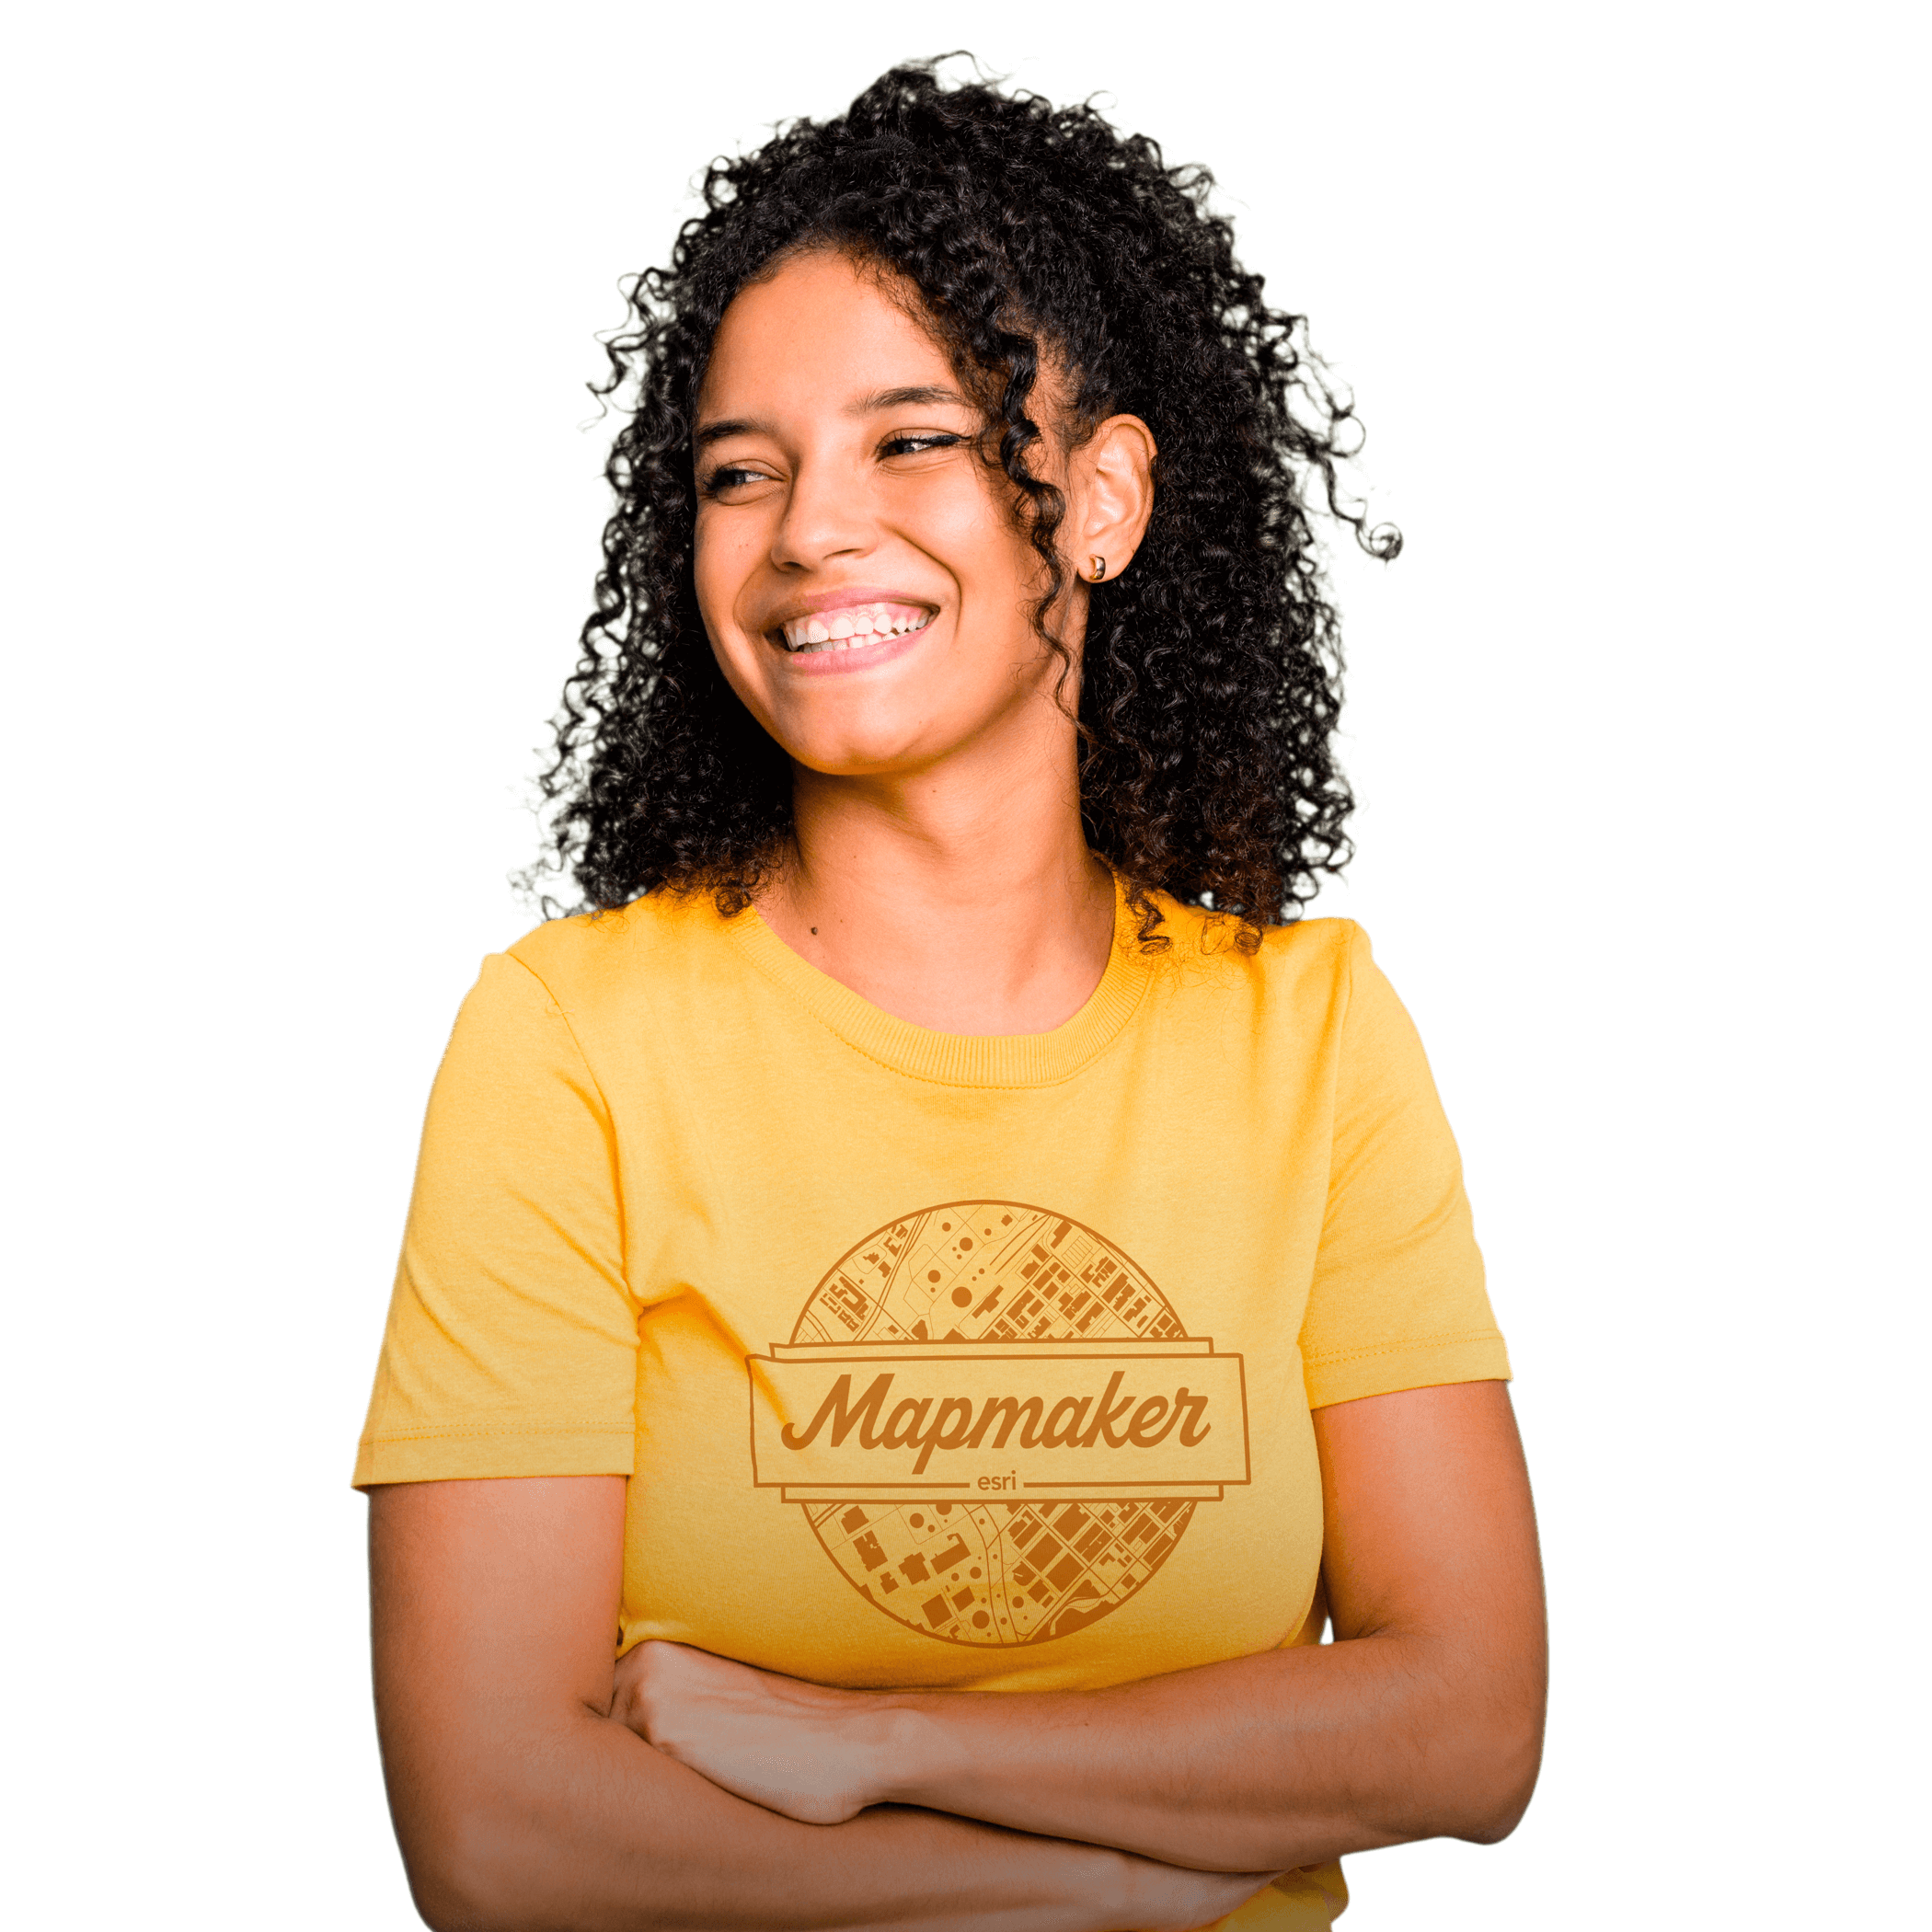 A laughing person wearing a yellow tee shirt with the slogan "Mapmaker" with an abstract geometric background of blue, red, and warm yellow